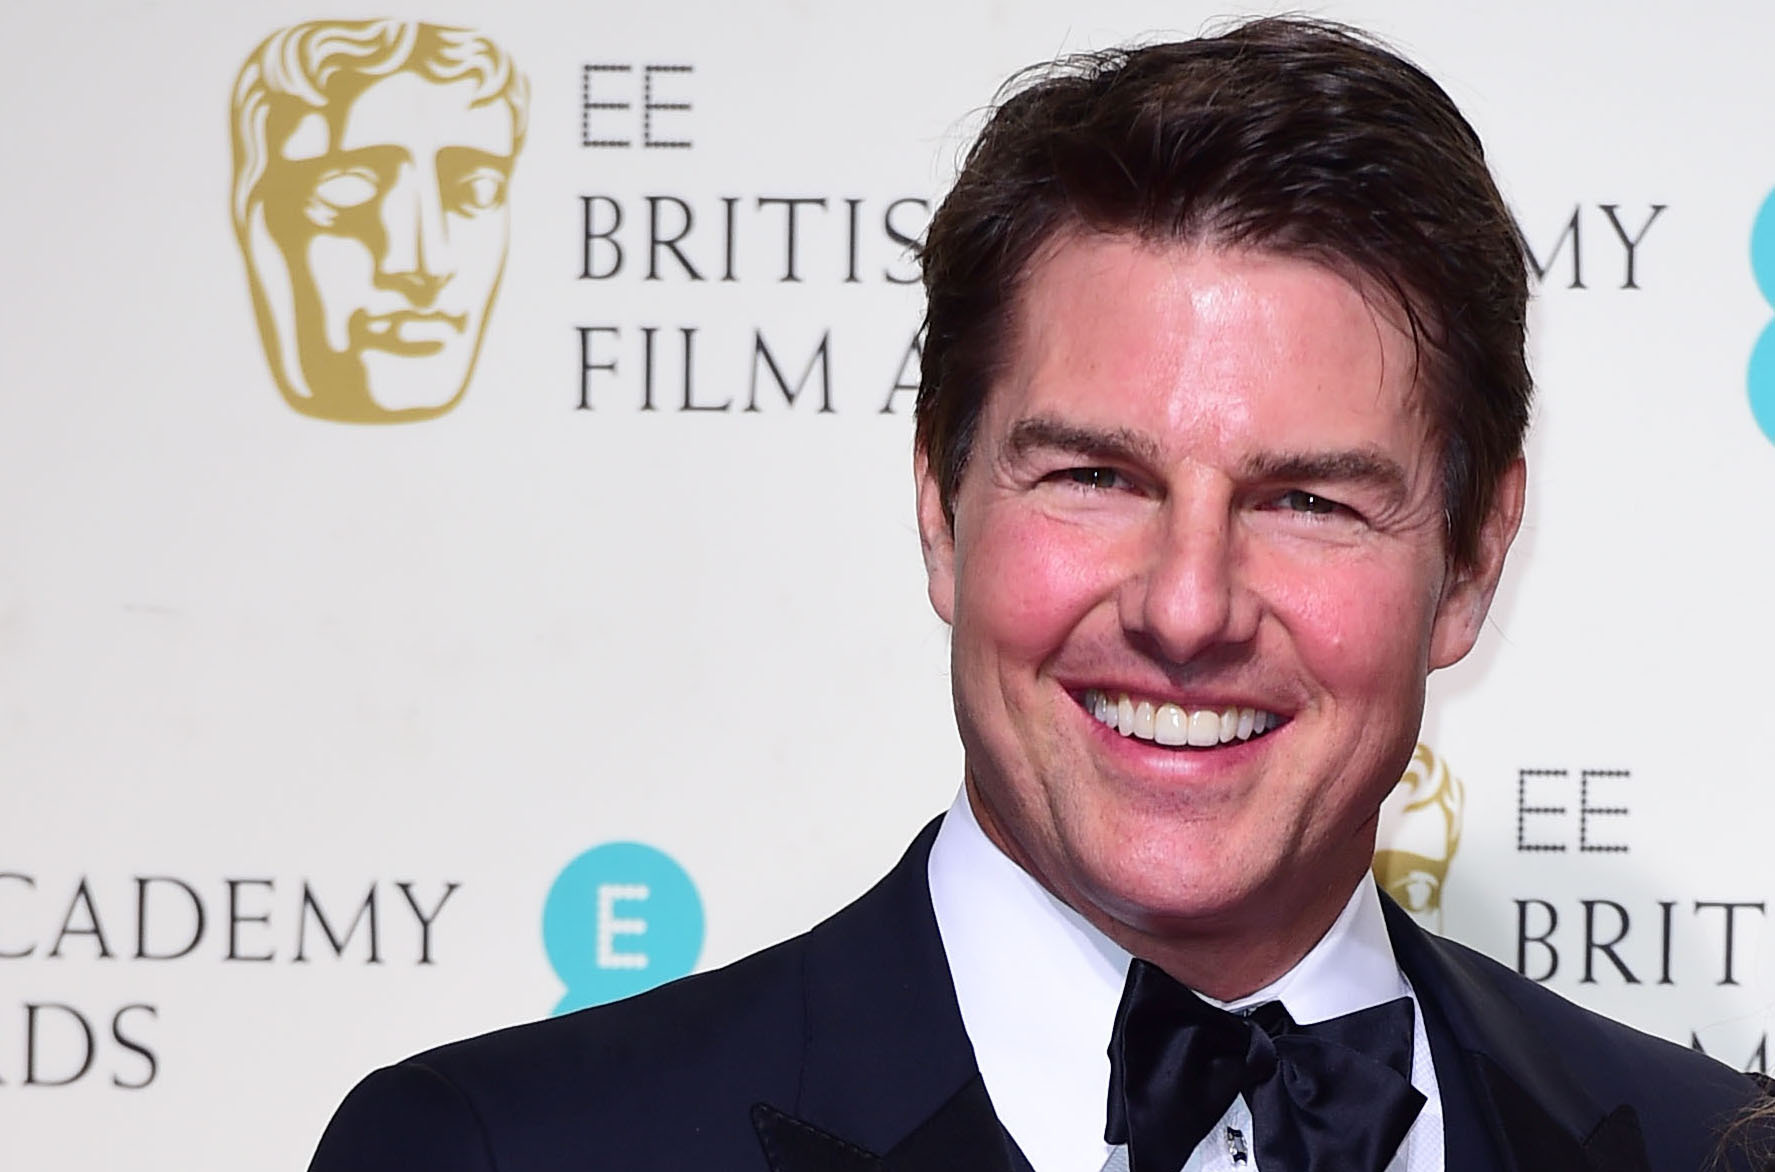 Tom Cruise at the Baftas